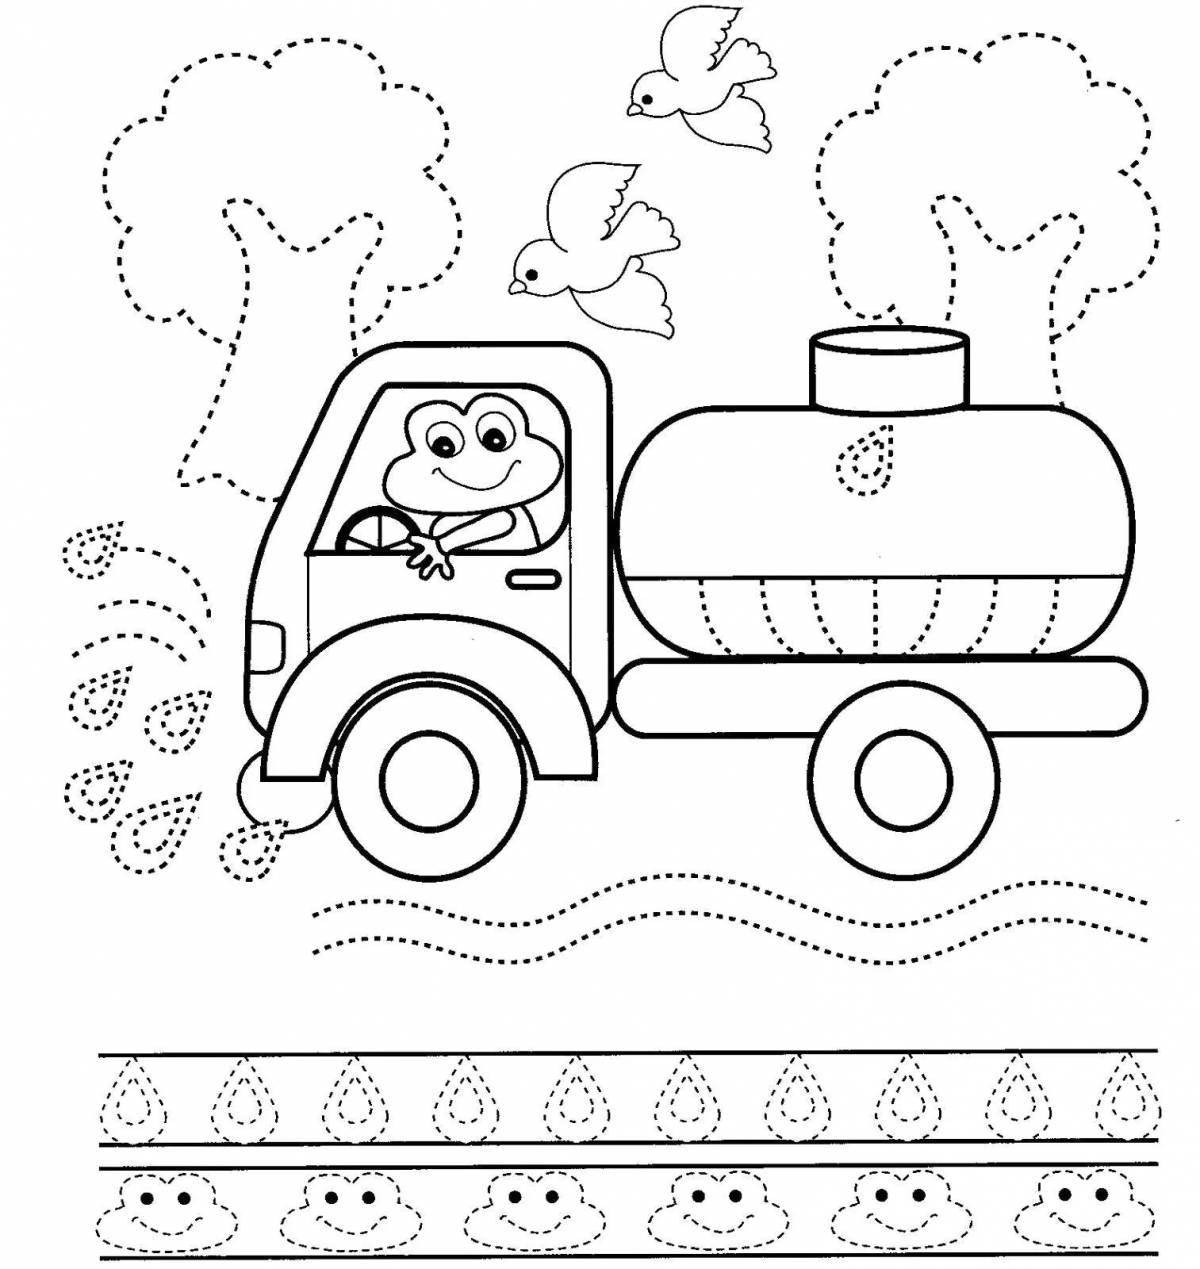 A fascinating coloring book for the older group of kindergarten